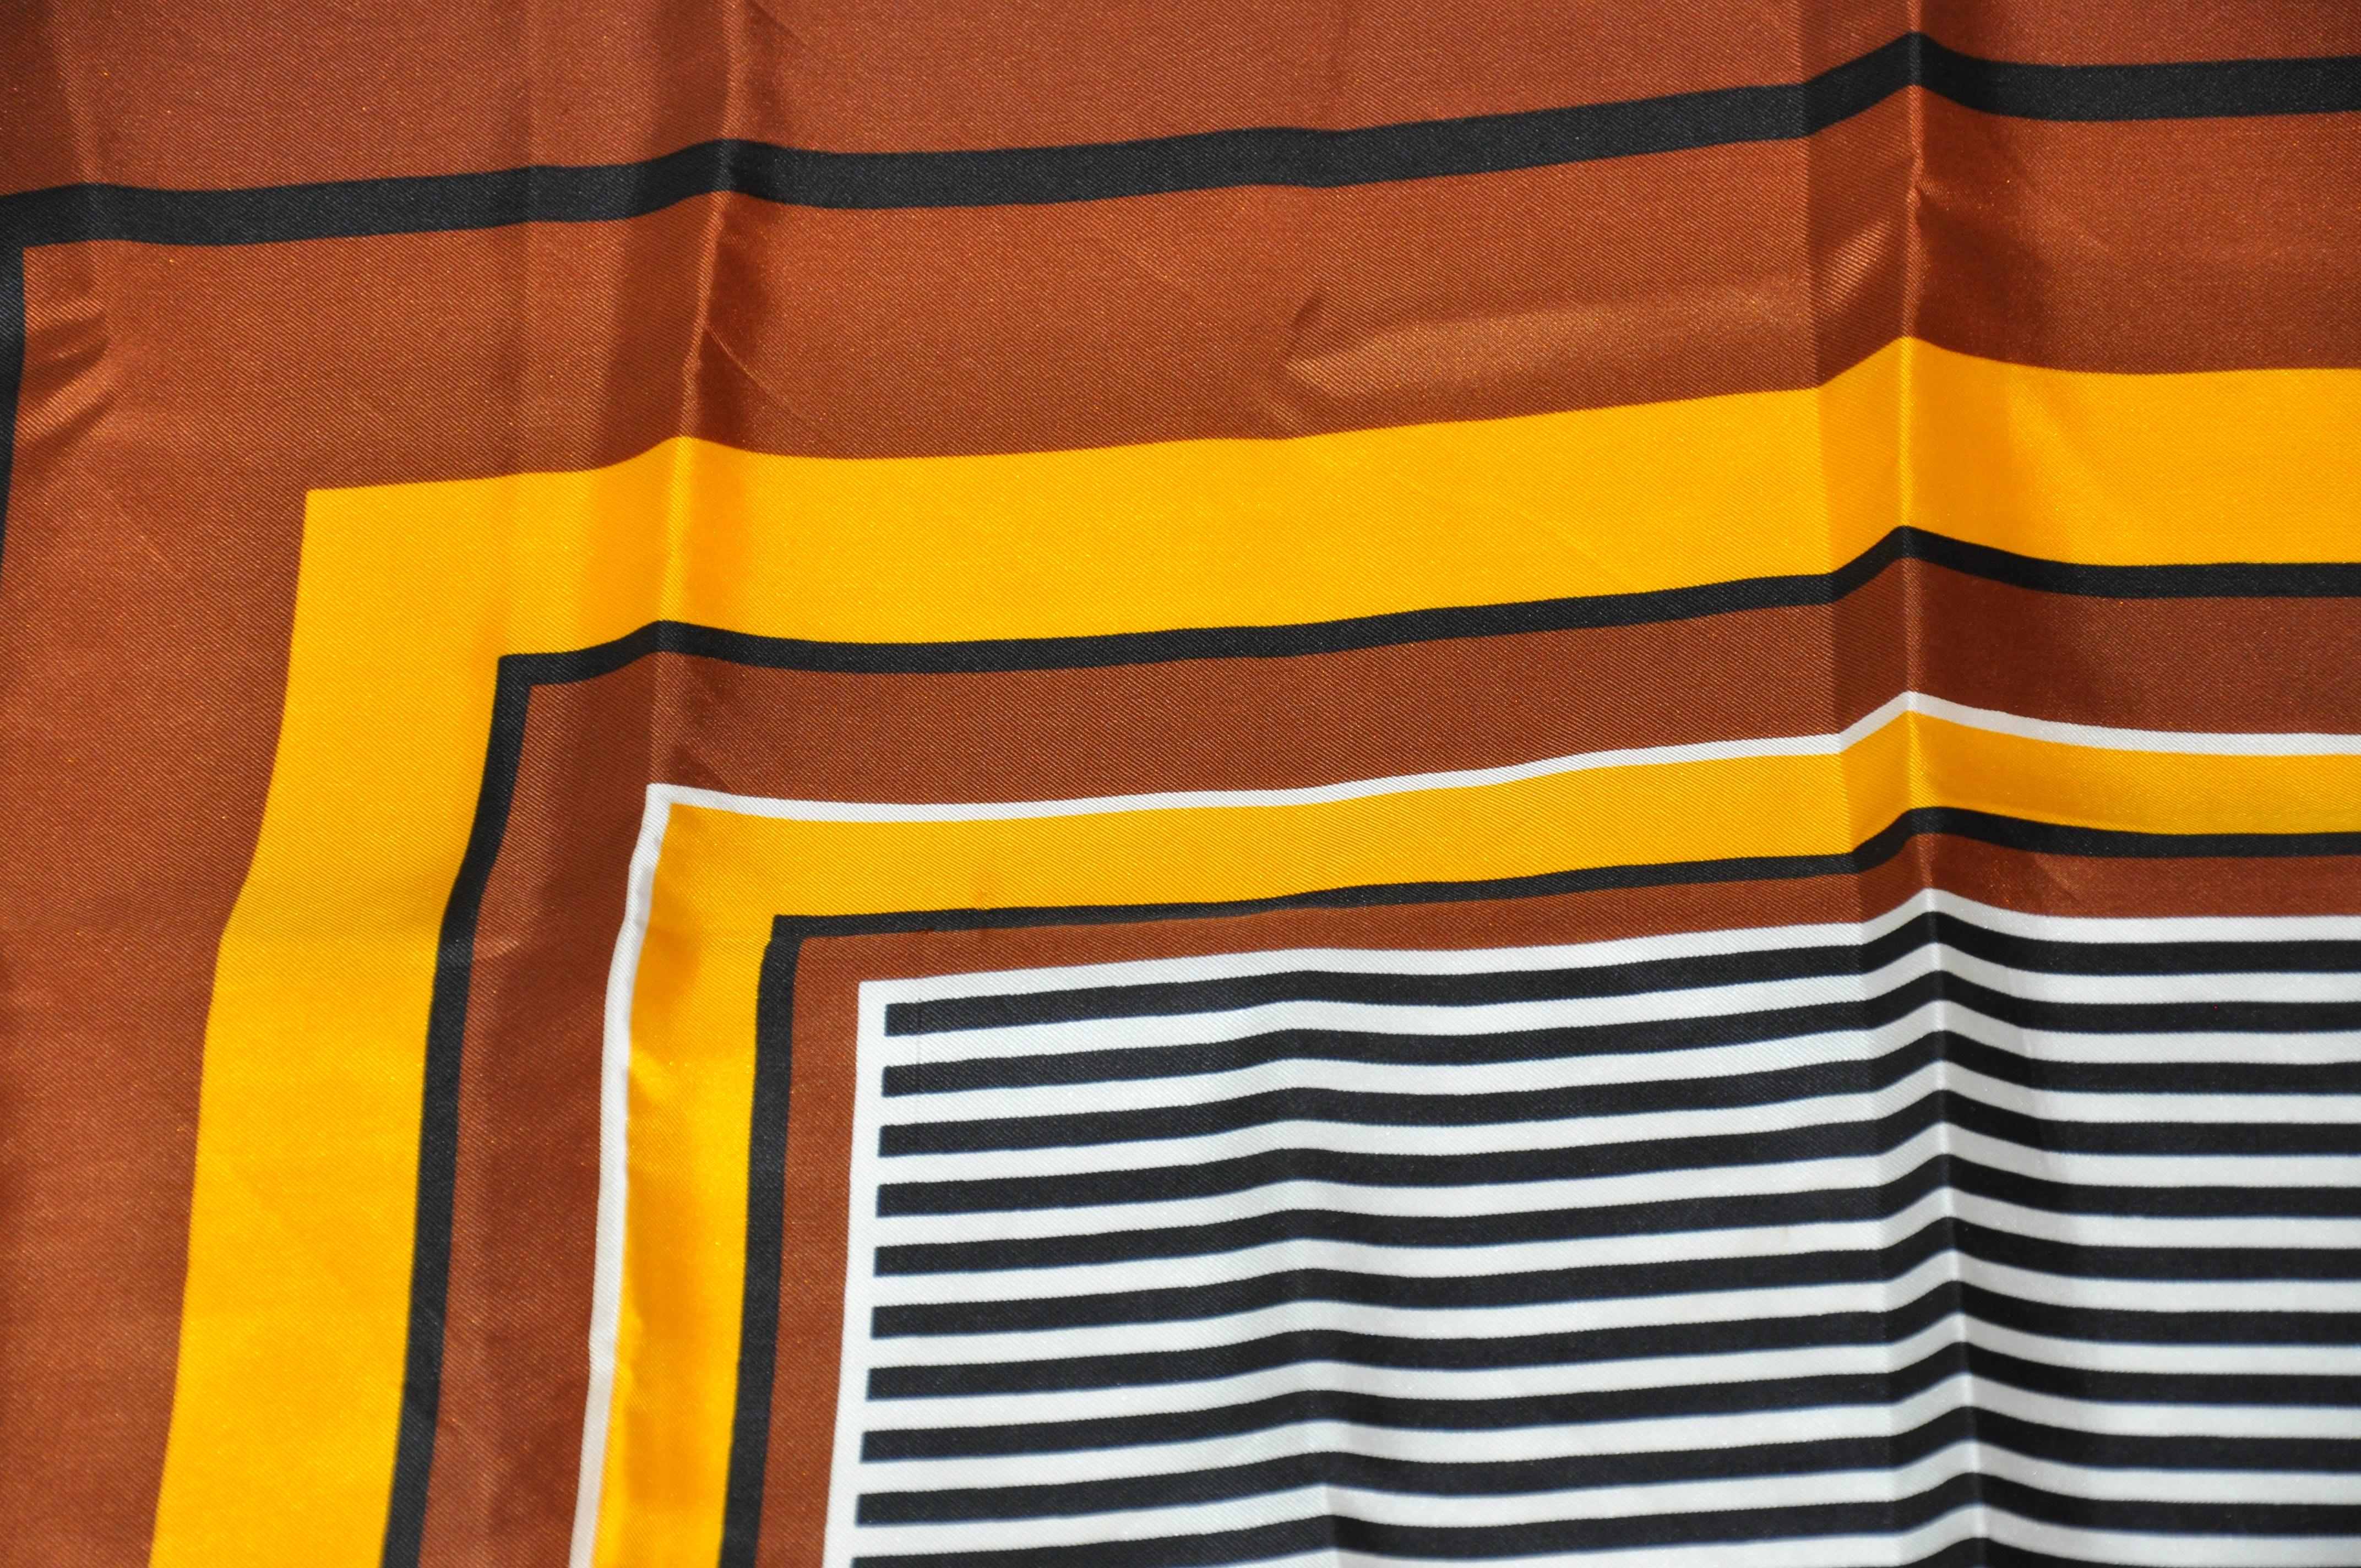 Paco Rabanne Rich Shades of Browns and Yellow Striped Center Silk Scarf In Good Condition For Sale In New York, NY